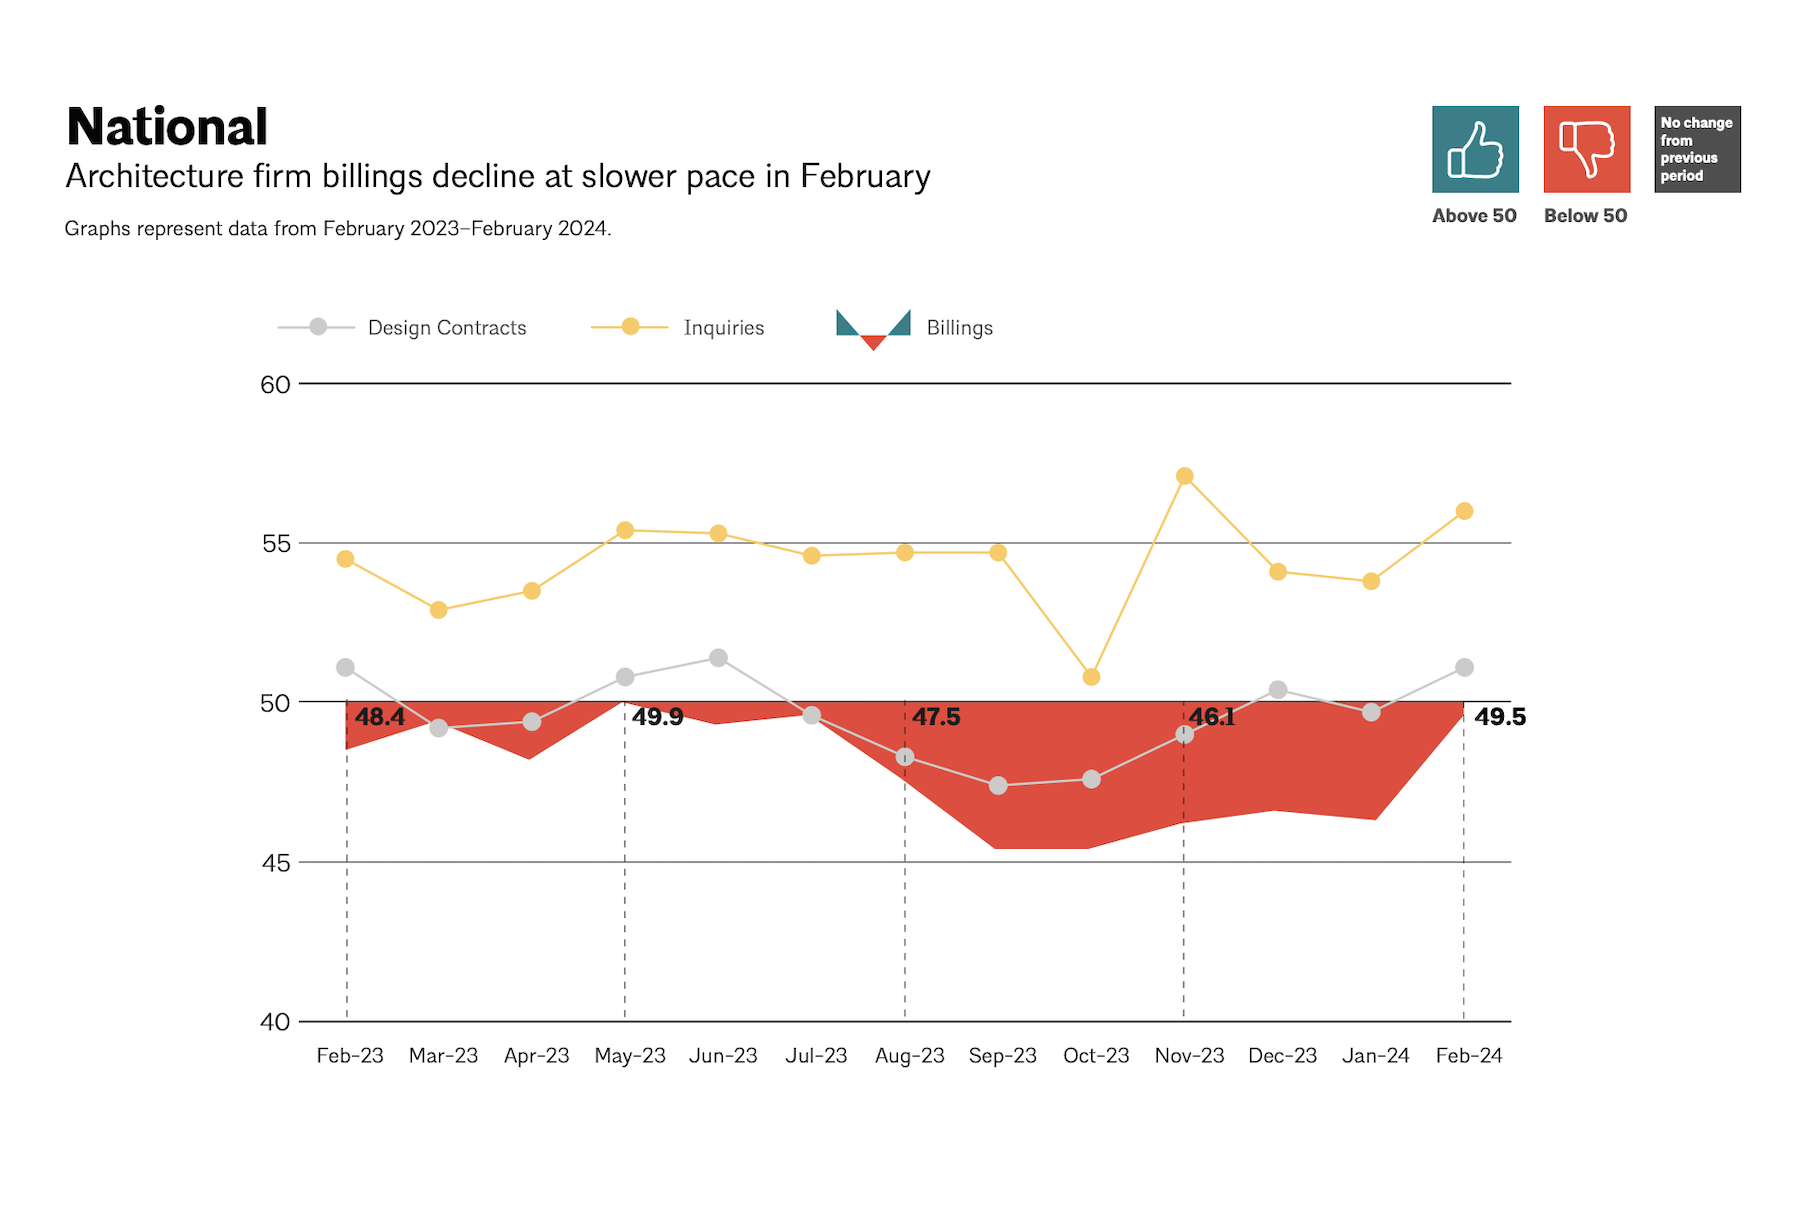 Architecture firm billings see modest easing in February